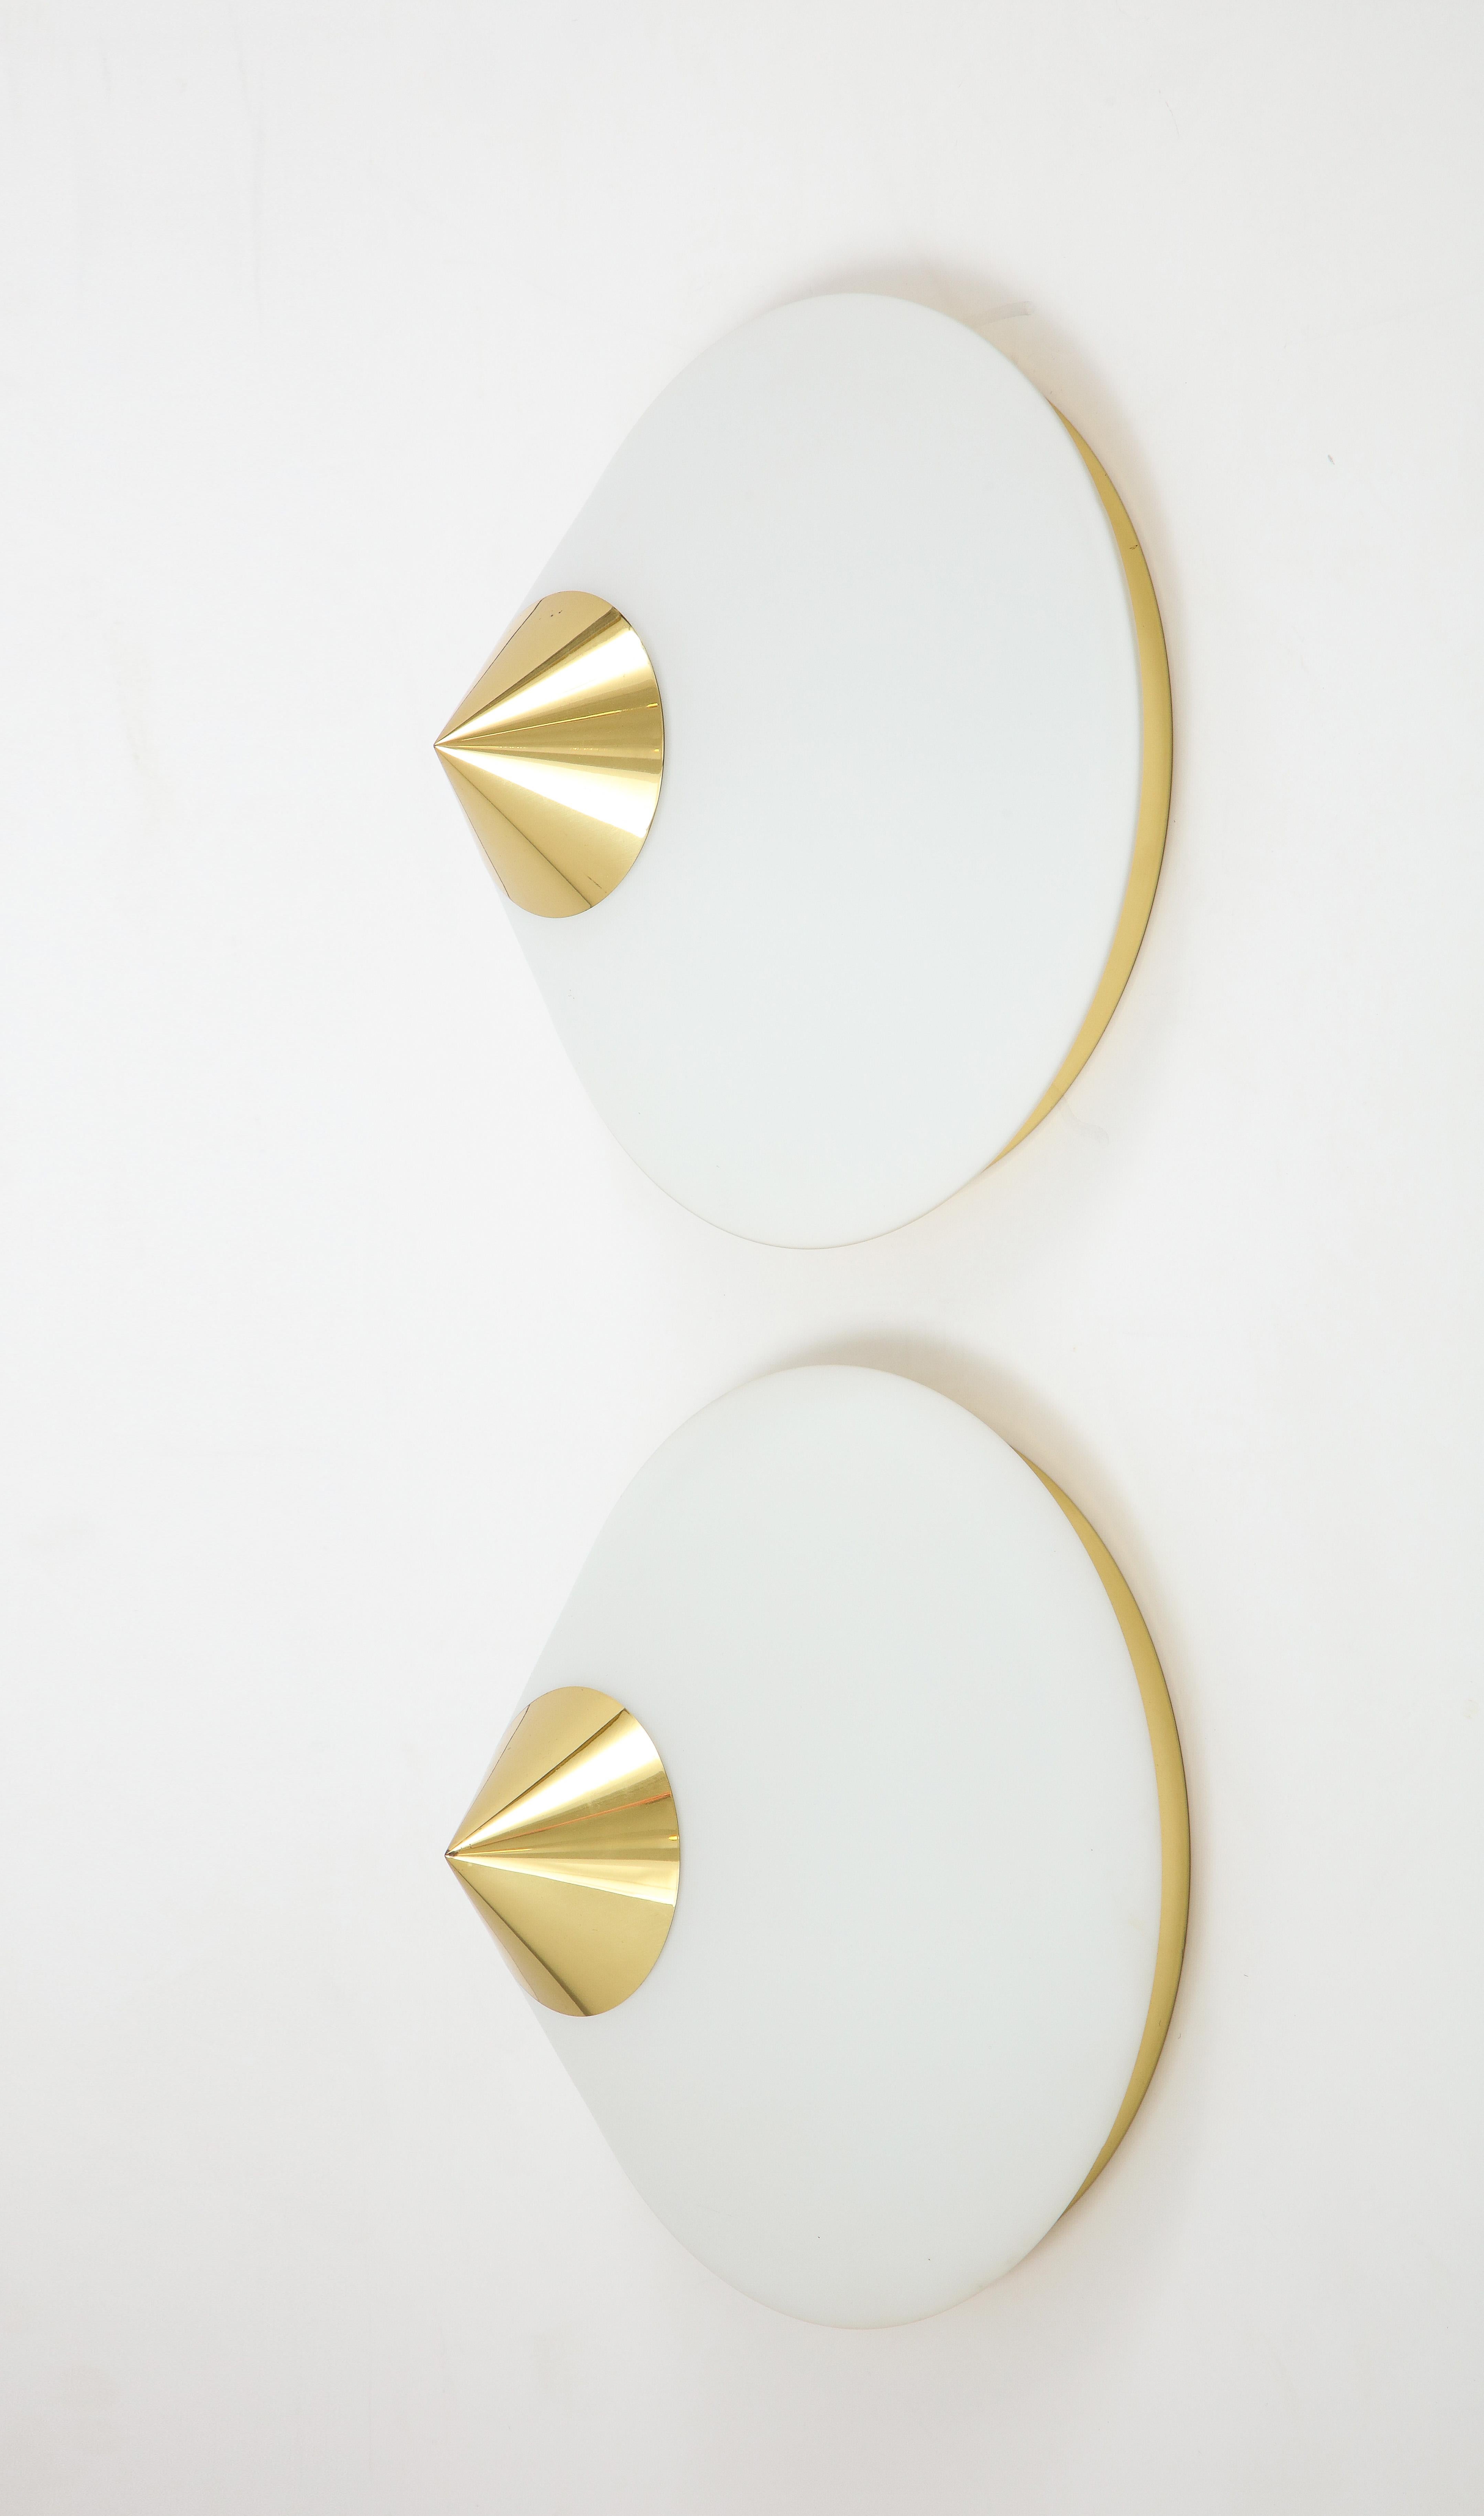 Pair of 1970s midcentury flush mount / sconce by Limburg.
The large cone shaped opaline glass shade finished with a polished brass cap sits on a
wall plate that has been newly rewired for the US with a single light source Max 60 watts.
They are